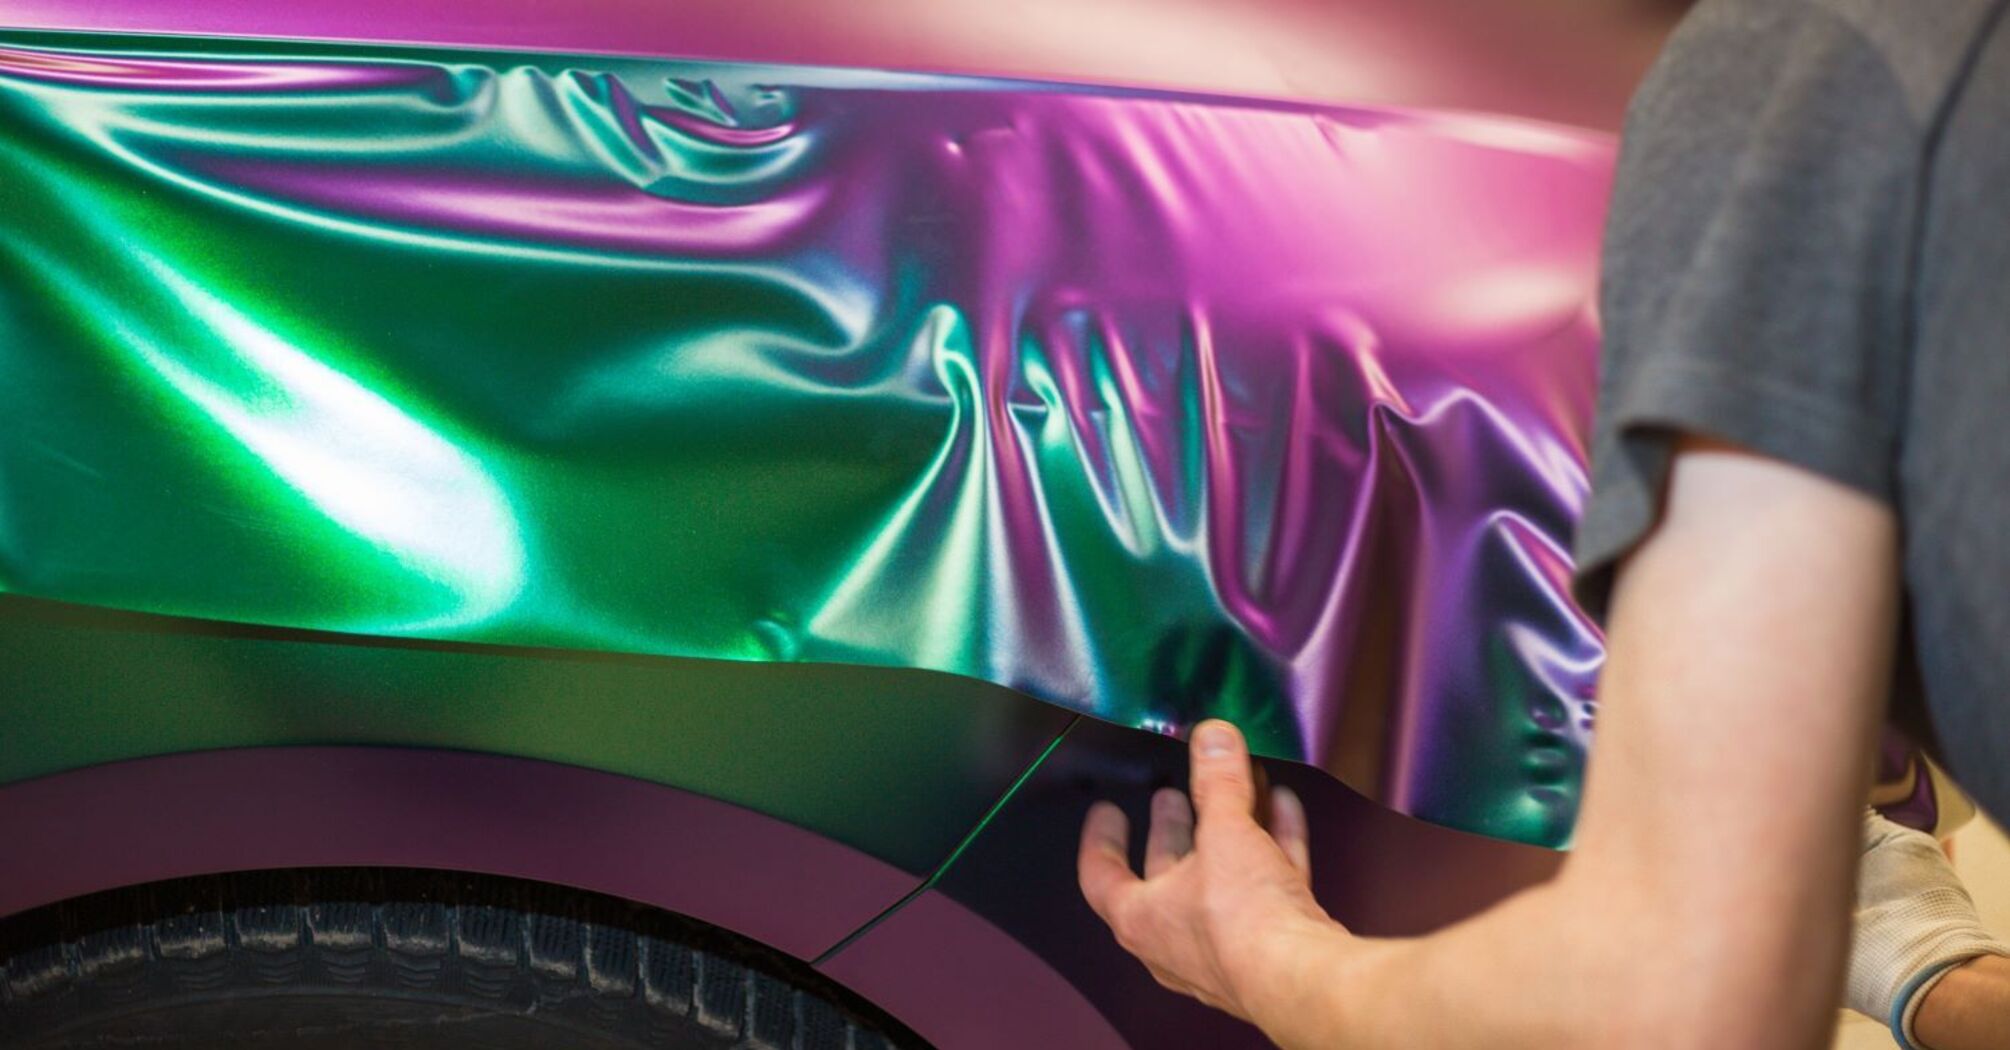 Advantages and disadvantages of painting a car chameleon